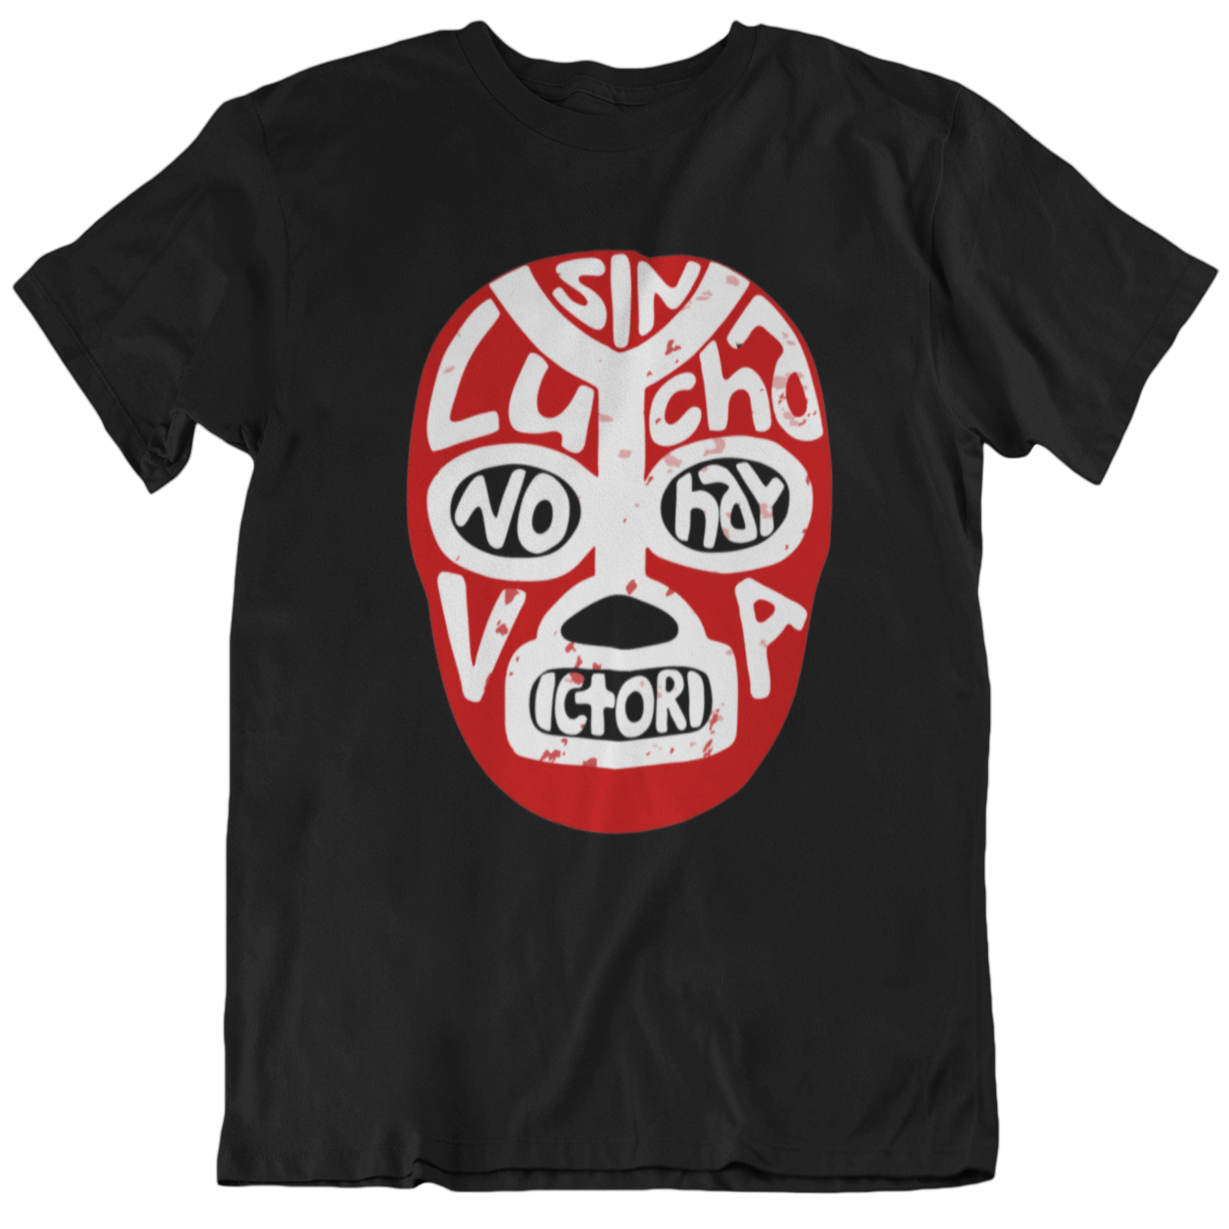 Funny and empowering Latino black t-shirt for Spanish speakers.  the graphic is tattoo-style lucha Libra mask.  the text on the mask states "sin lucha, no hay Victoria"